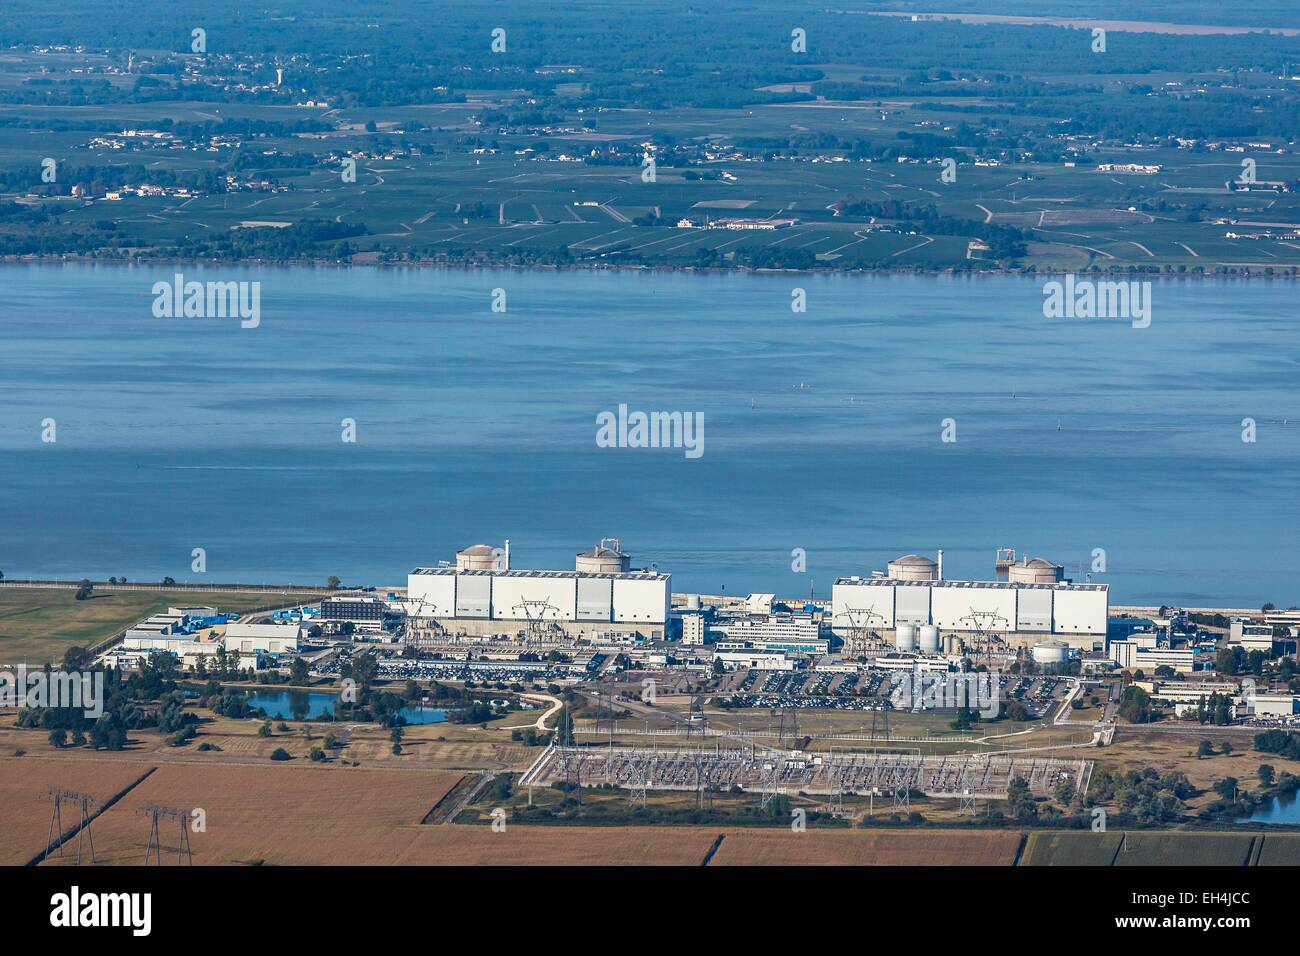 France, Gironde, Braud et saint Louis, nuclear power station on La Gironde river (aerial view) Stock Photo